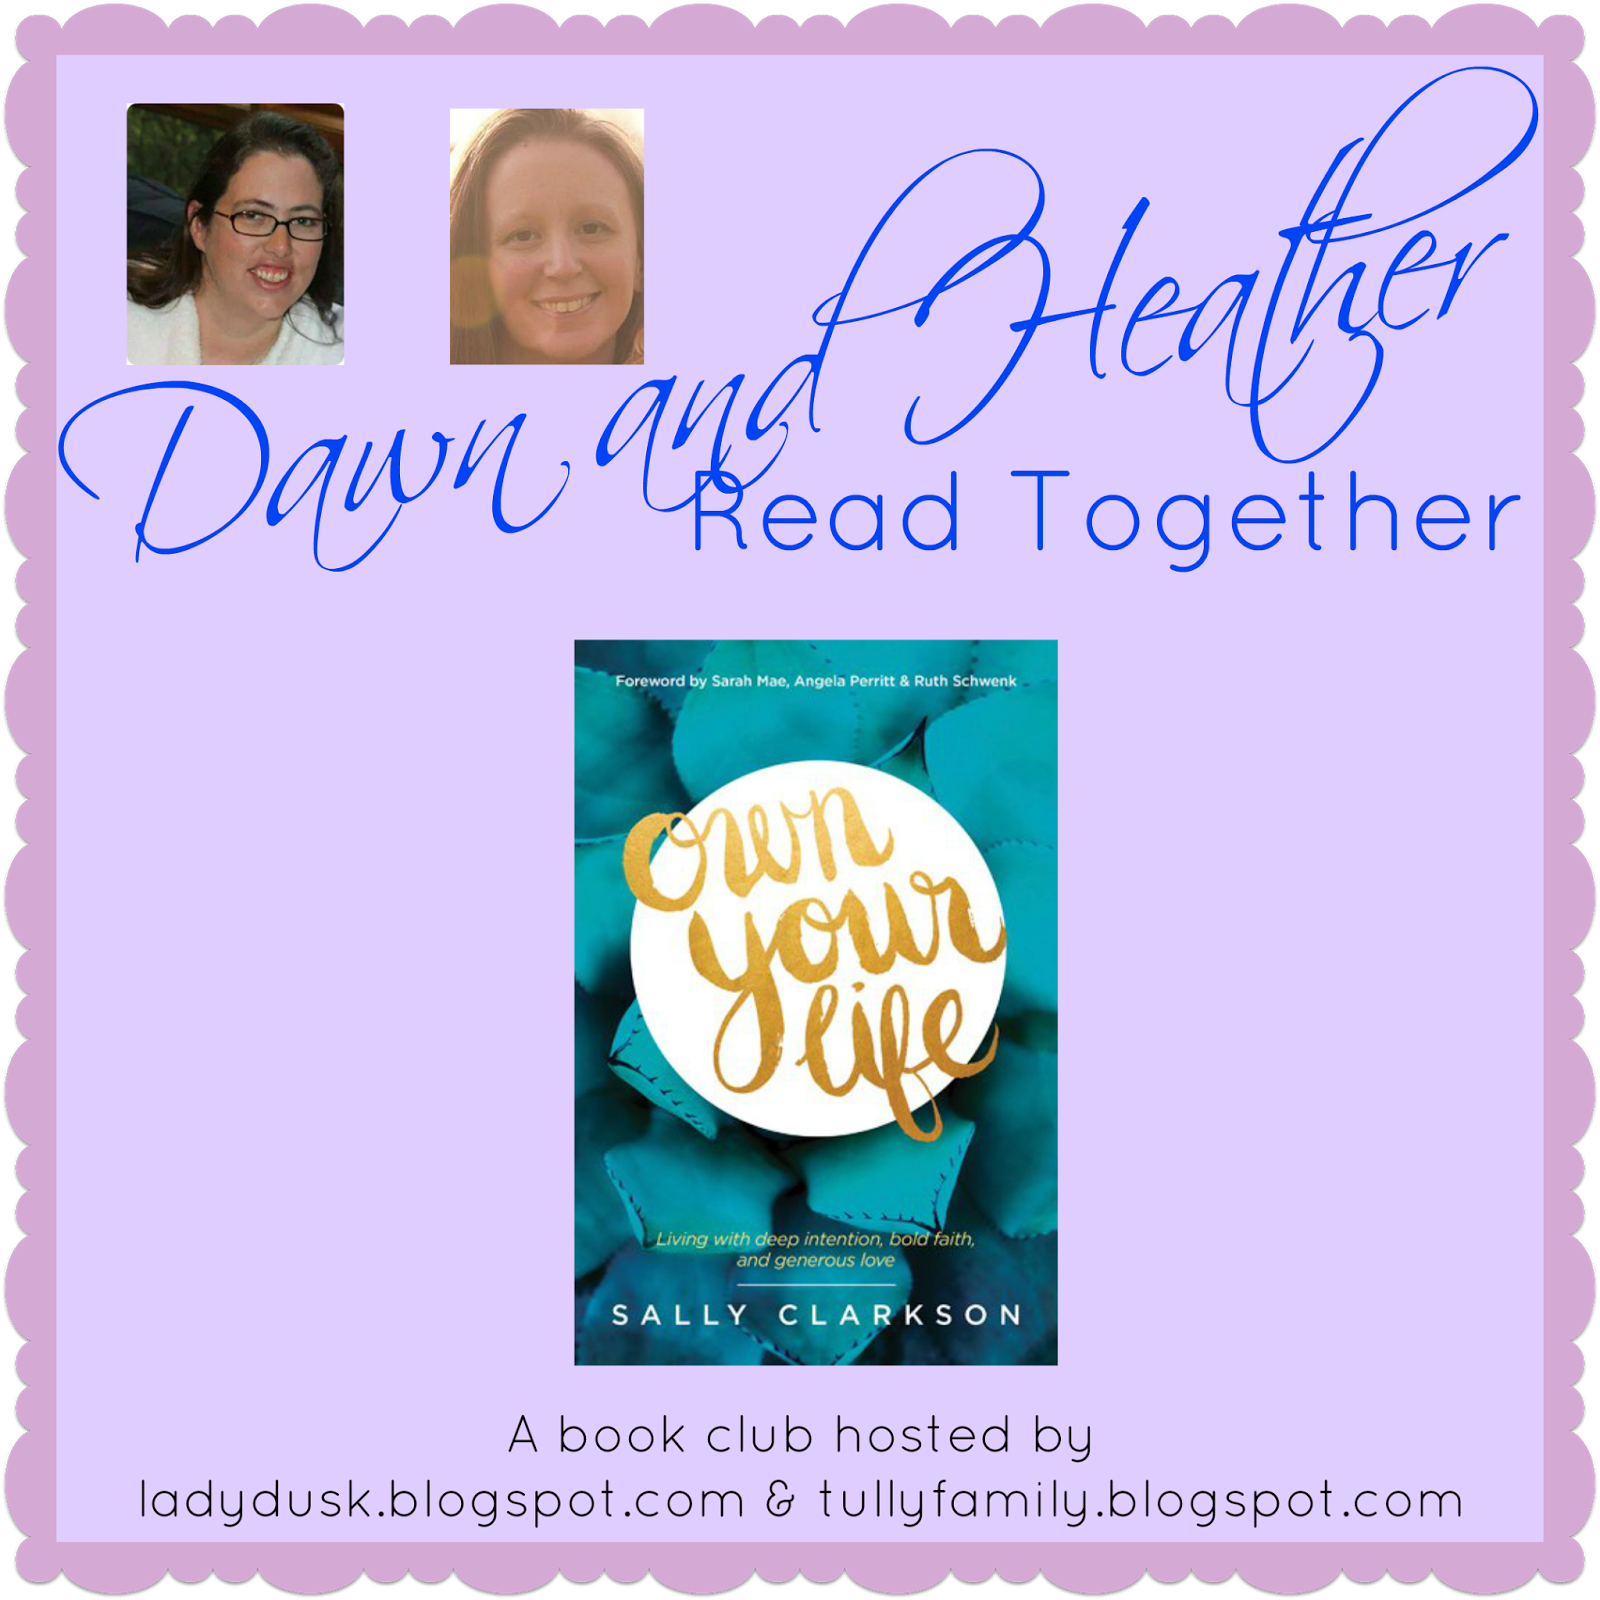 Dawn and Heather Read Together: Own Your Life (Chapter 3)